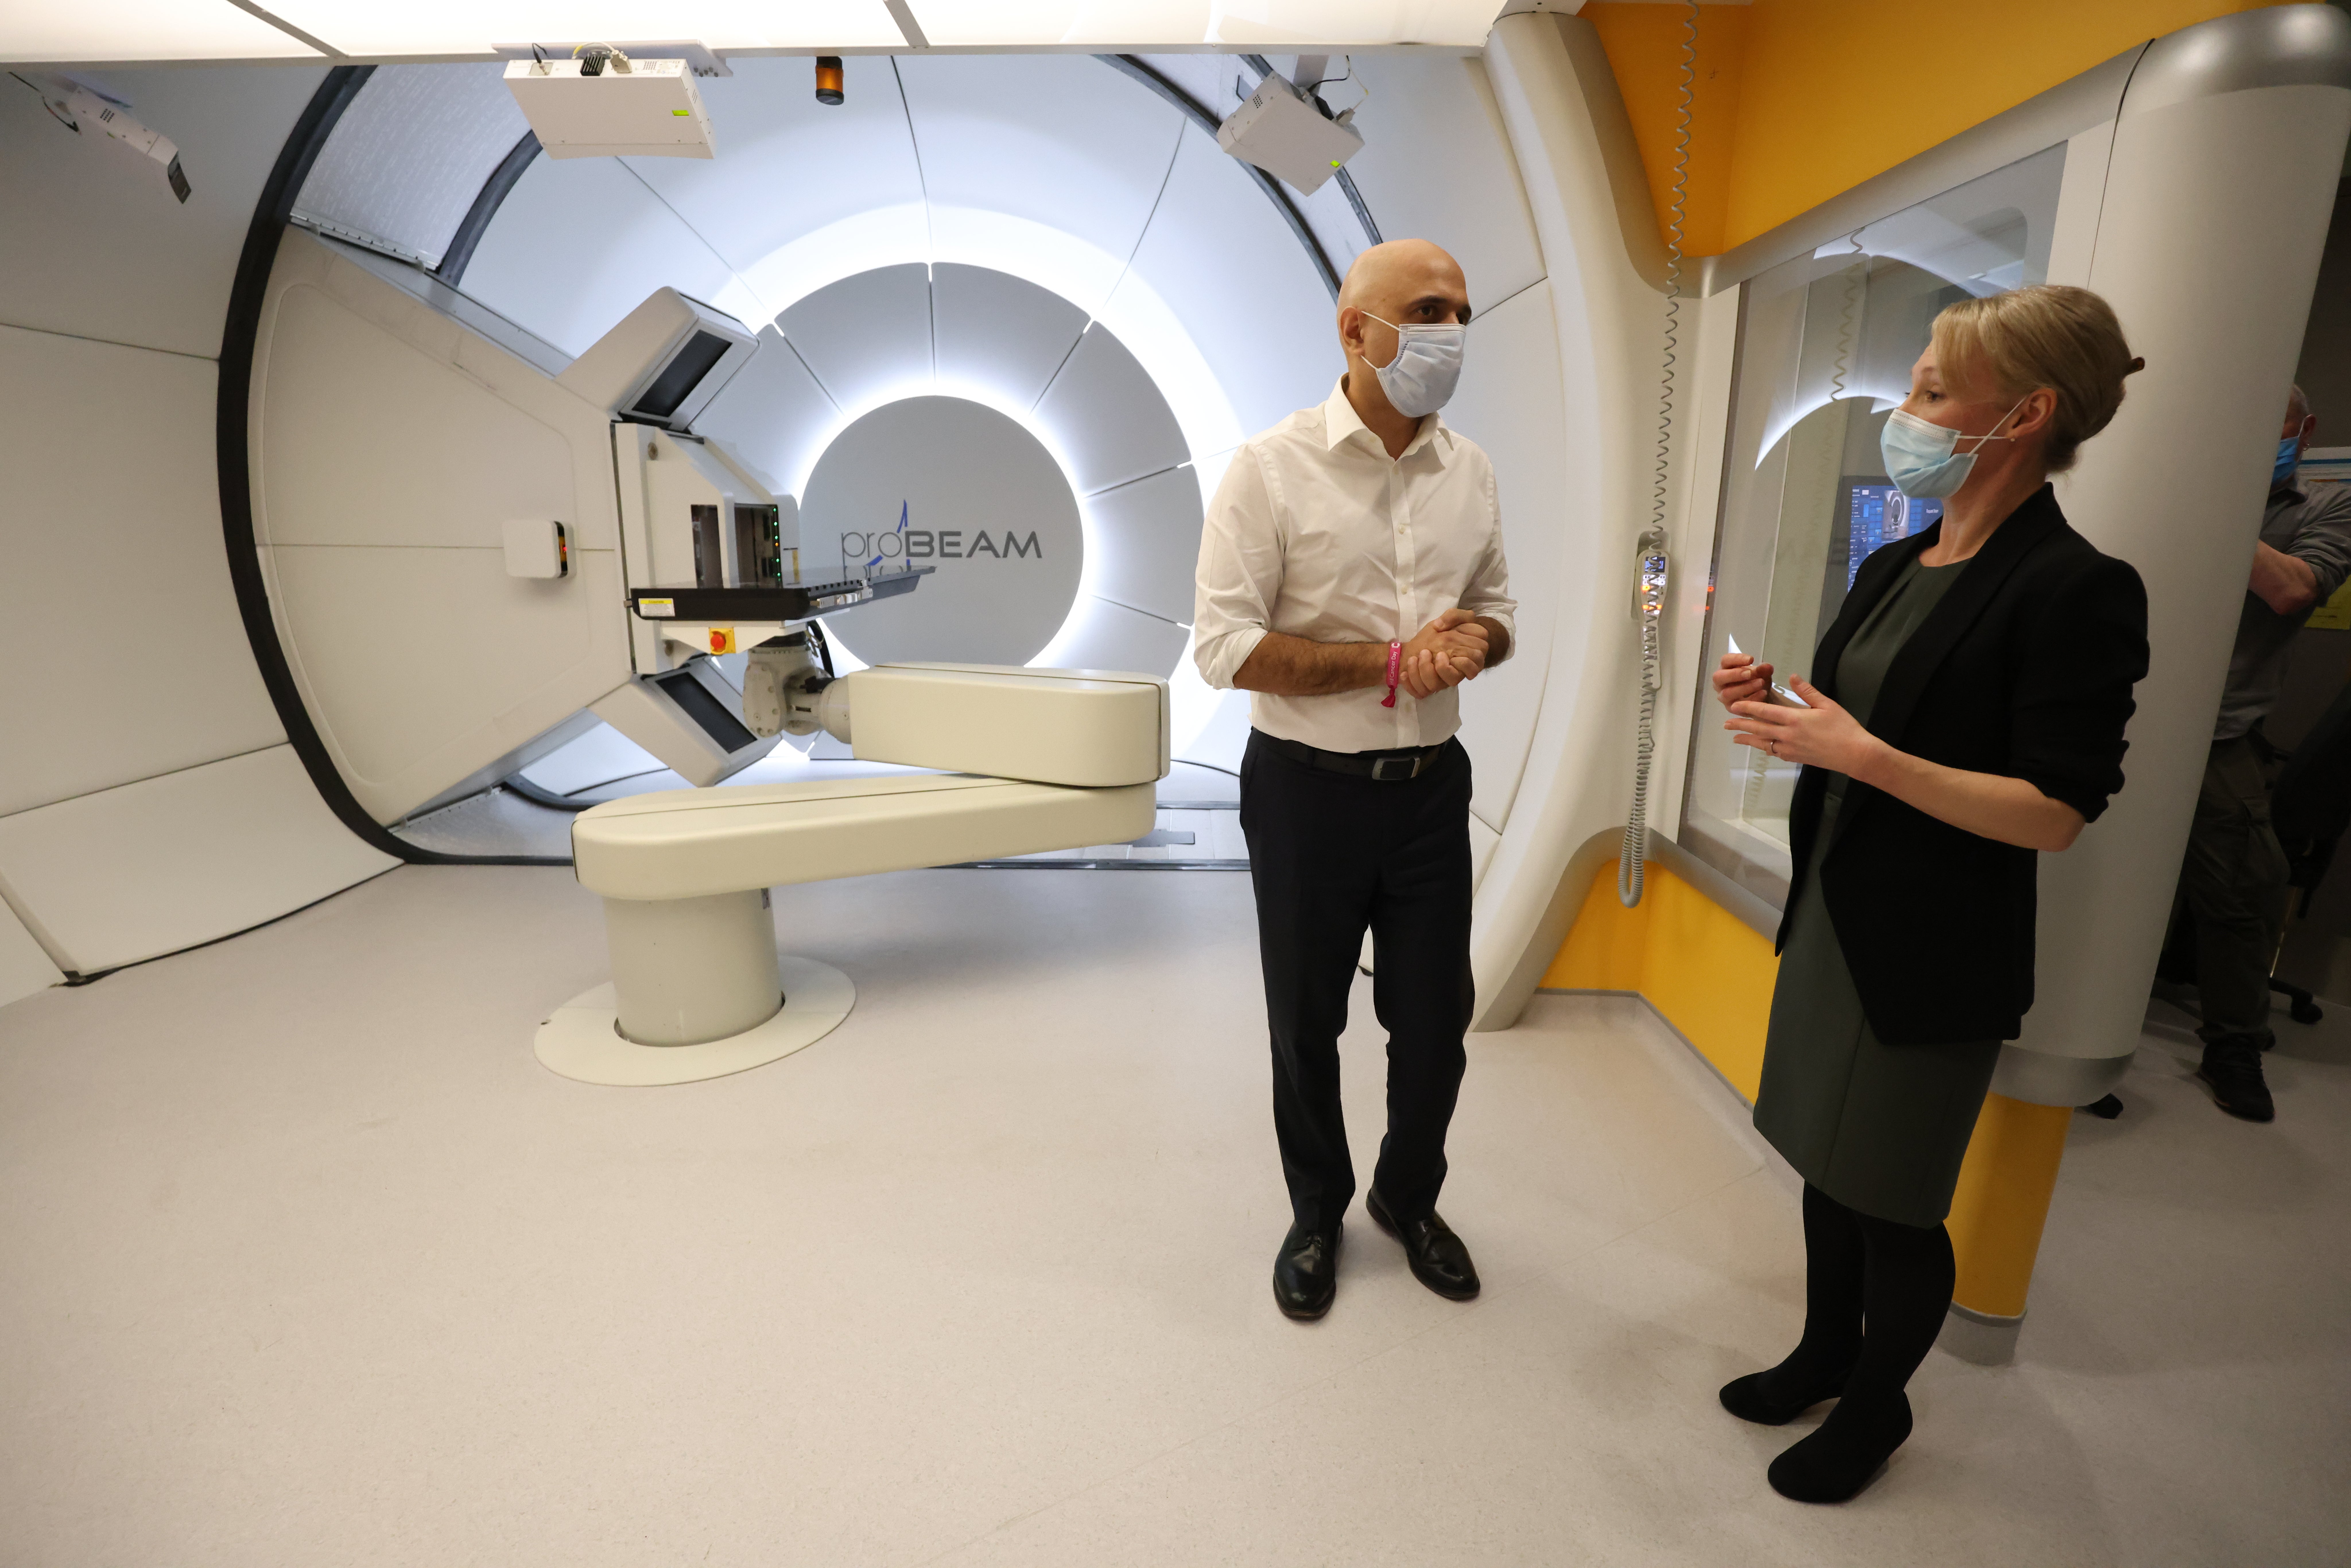 Sajid Javid with therapeutic radiographer Laura Allington as he views the proton beam scanner during a visit to University College Hospital in London to mark World Cancer Day (James Manning/PA)